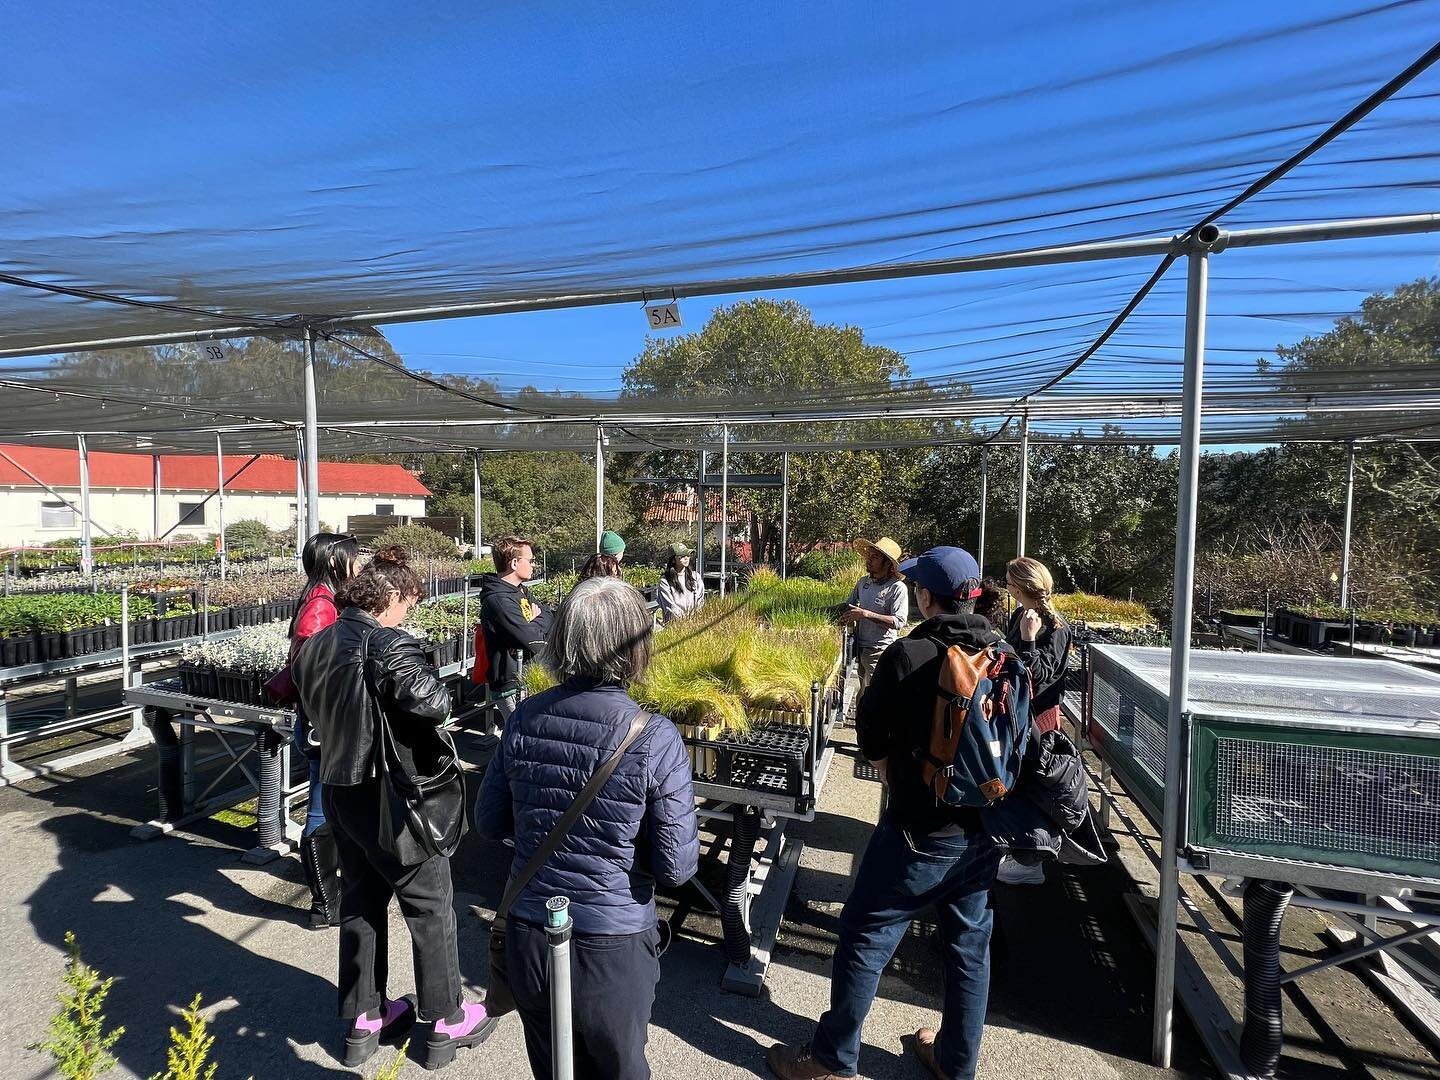 This week the M.Arch Studio 2 &ldquo;Systems + Environments&rdquo; led by Adam Marcus and Margaret Ikeda visited the @presidiosf for a tour of their project site, the Presidio Nursery. The students are developing proposals for a Center for Ecological